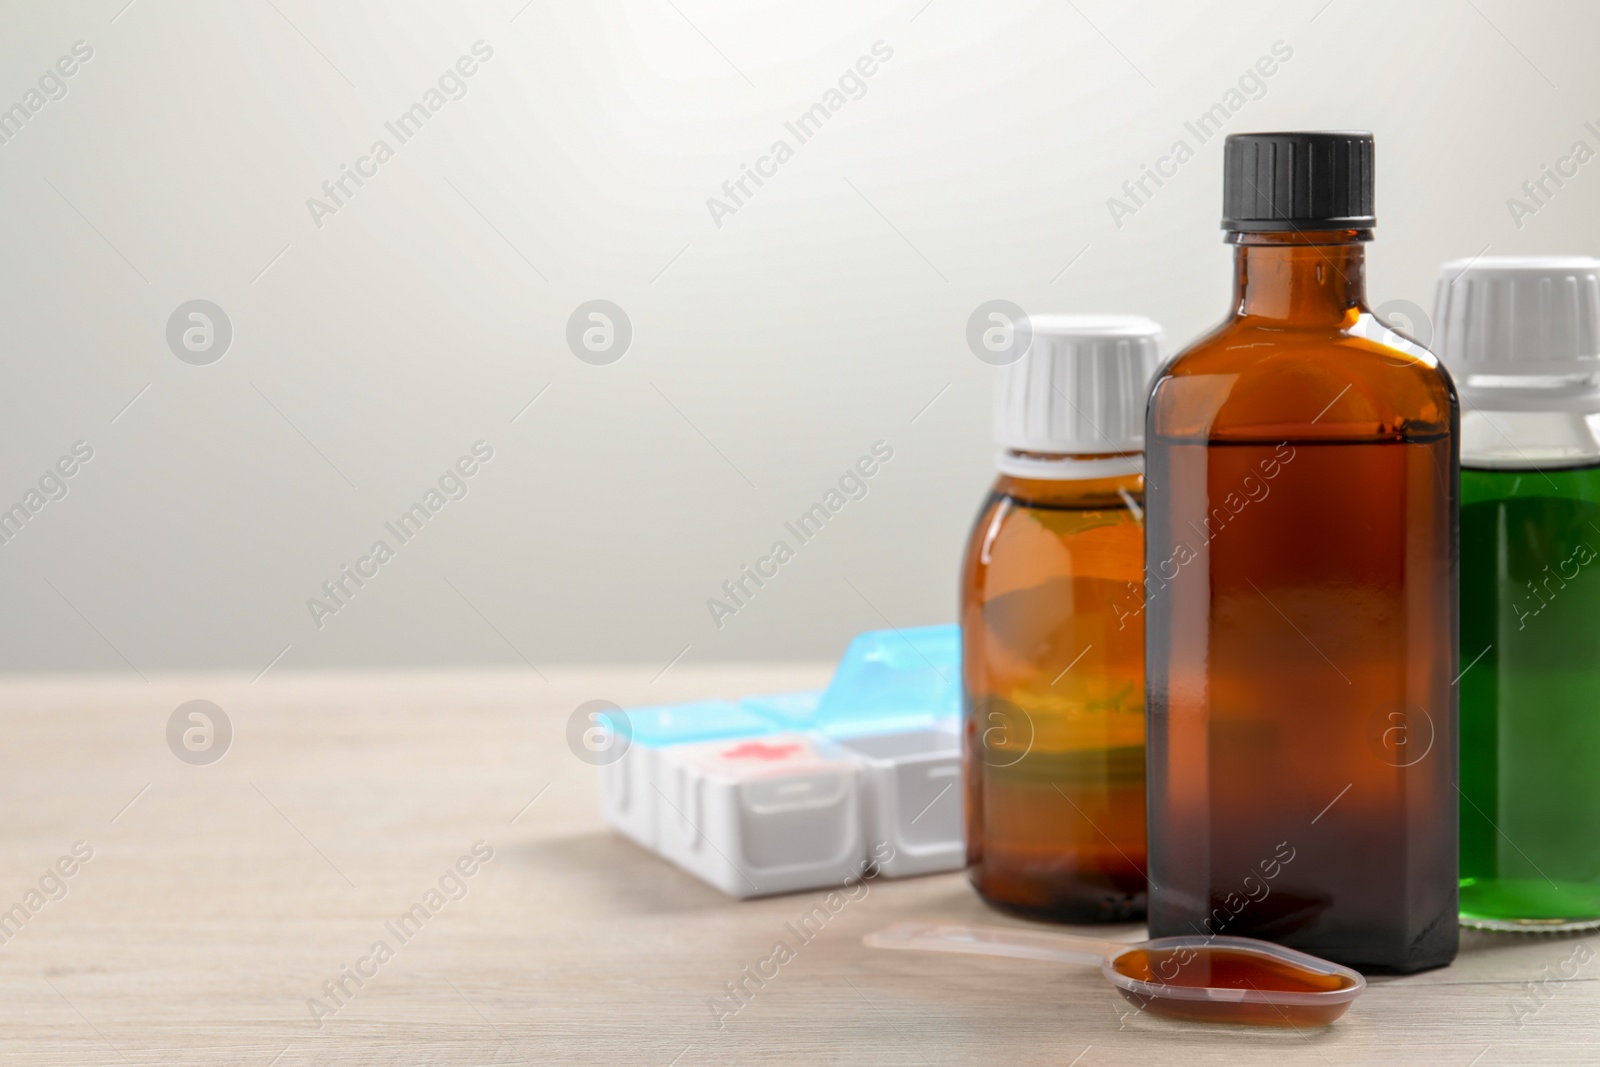 Photo of Bottles of syrup, dosing spoon and weekly pill organizer on table against white background, space for text. Cold medicine